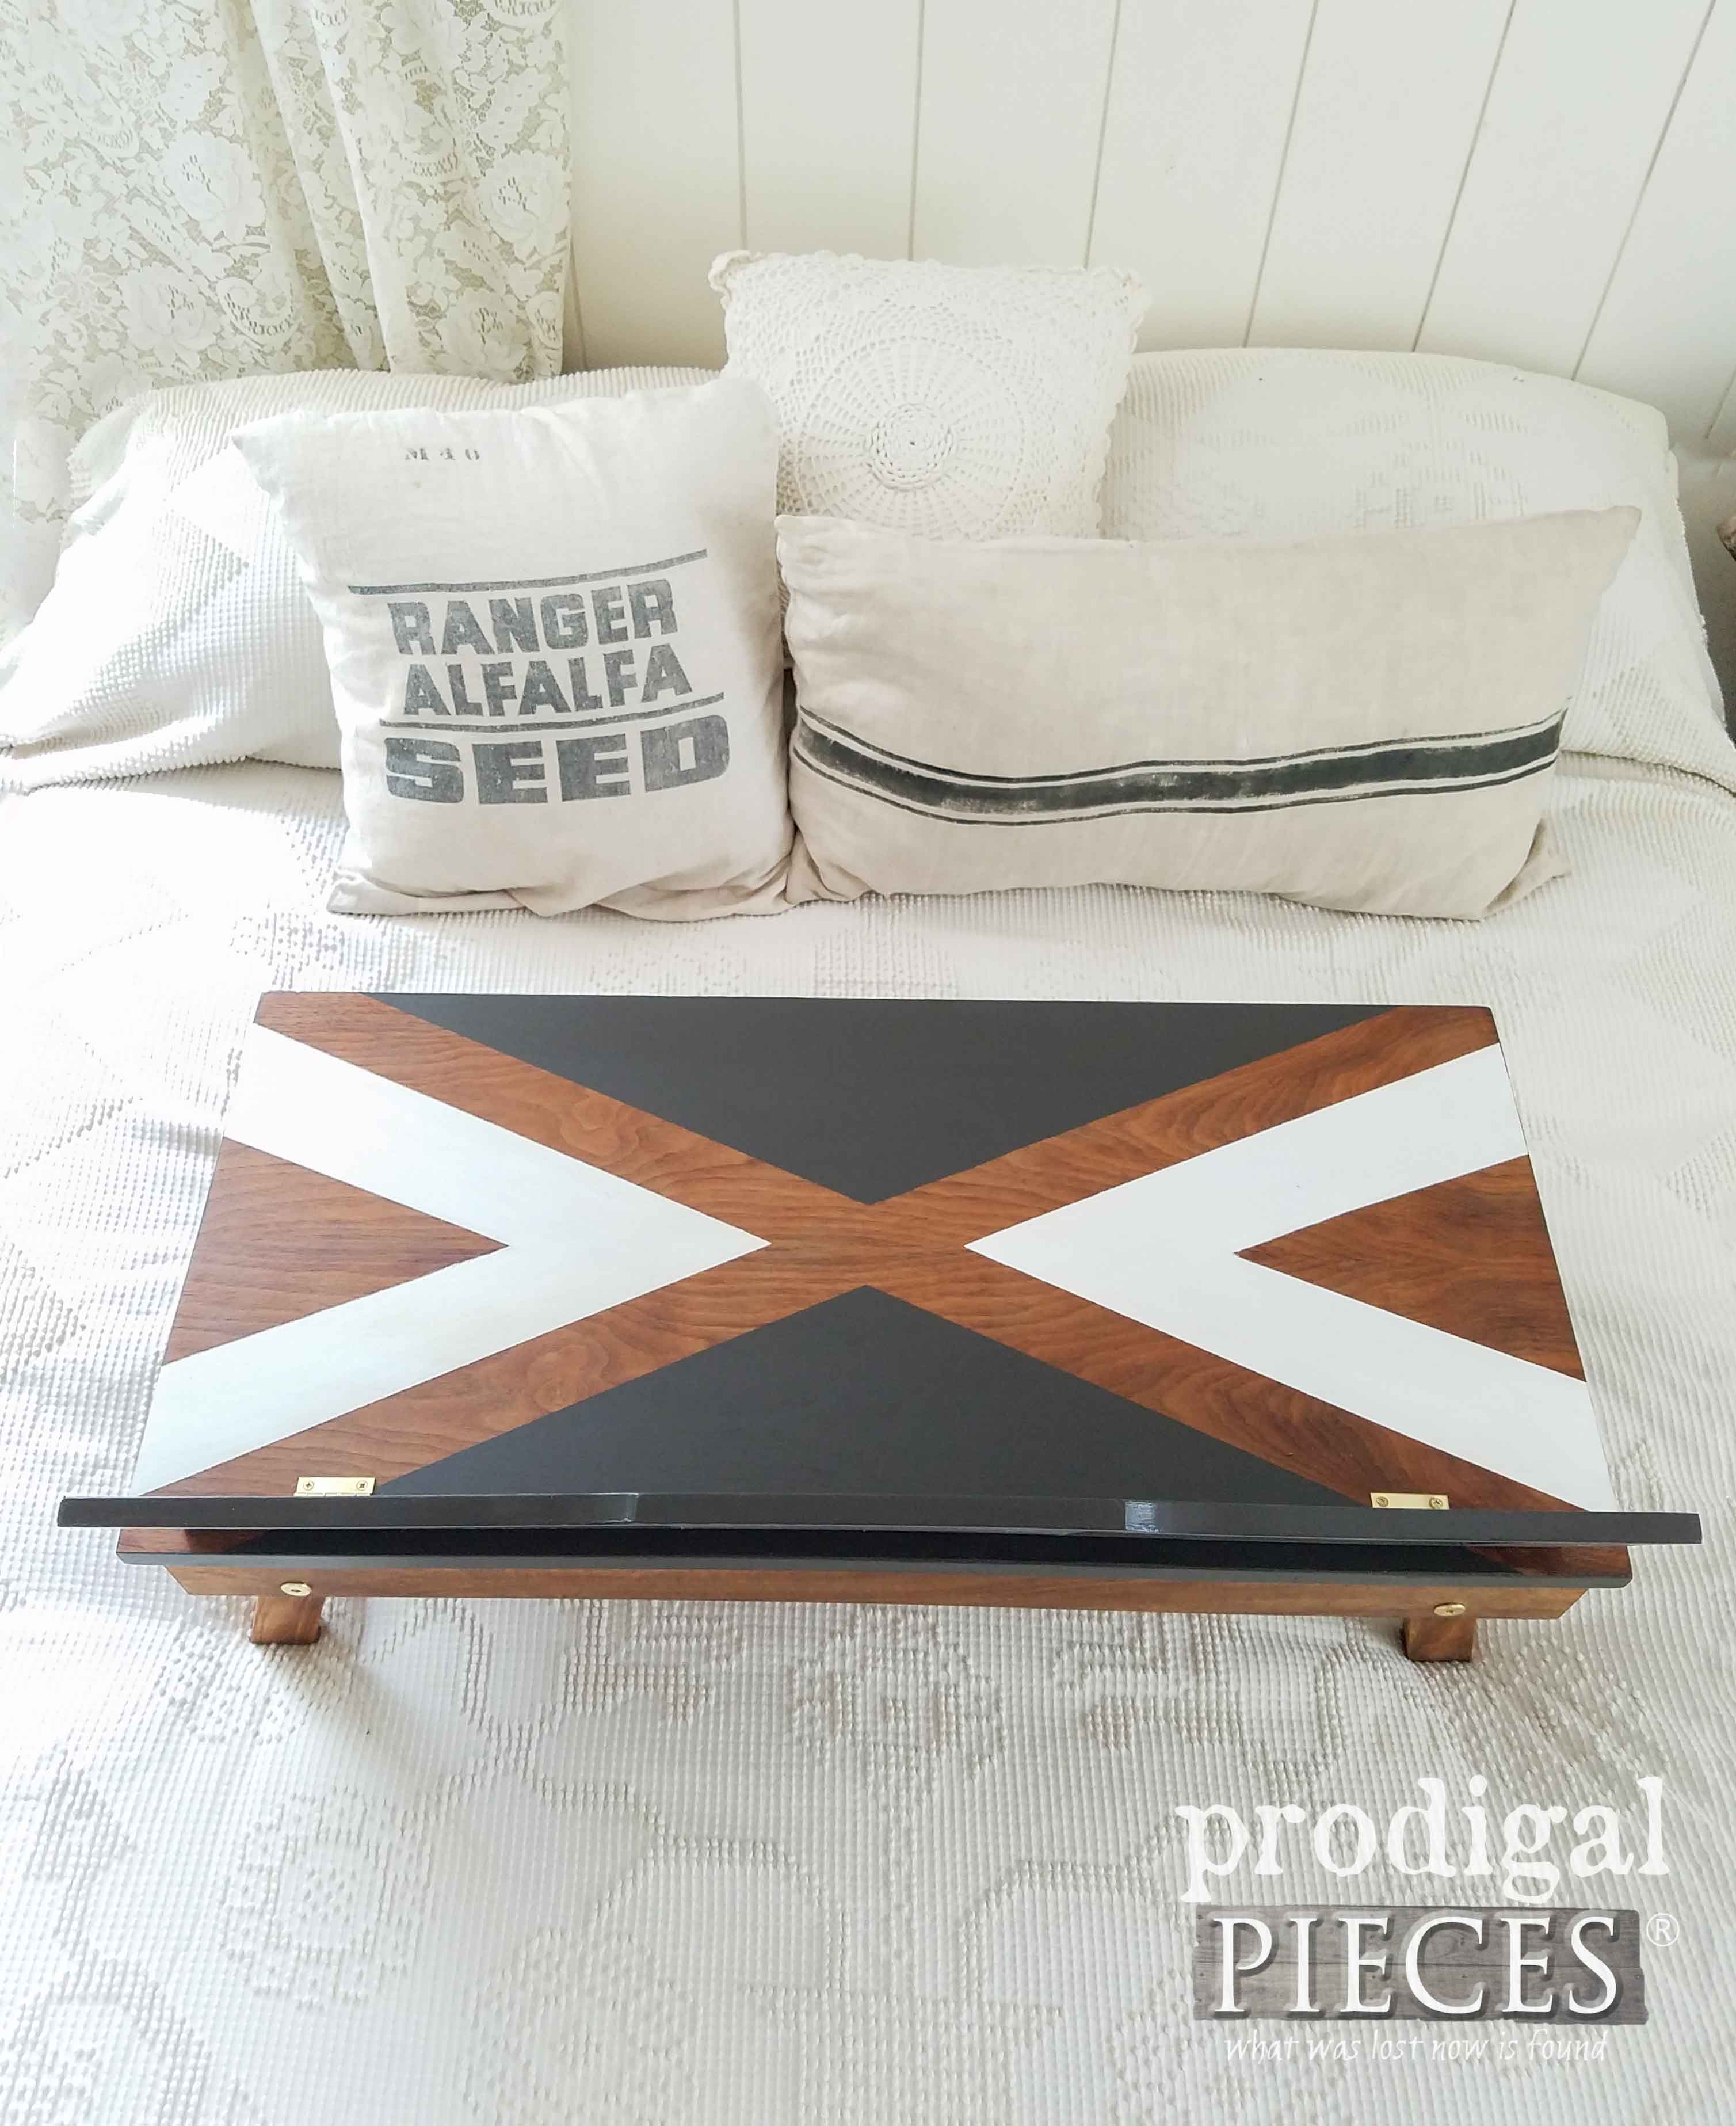 Upcycled Piano Bench becomes a Lap Desk with Storage by Prodigal Pieces | prodigalpieces.com